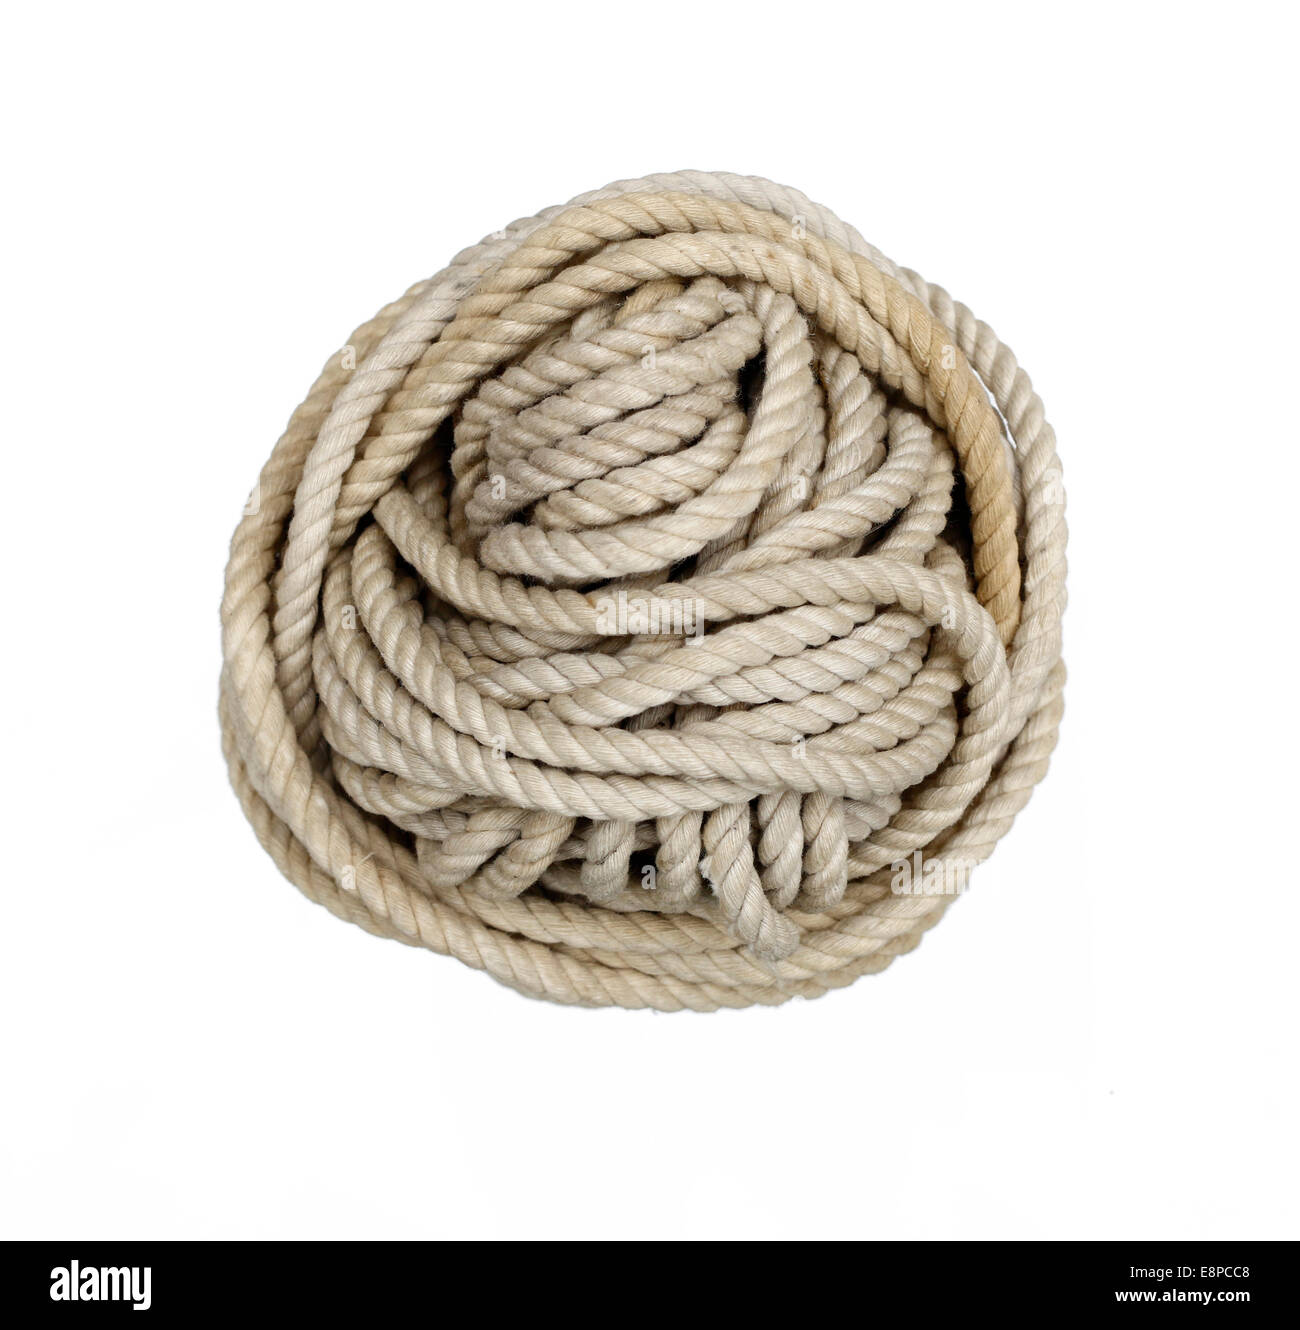 Ball of thick string stock photo. Image of bind, lashing - 12405598